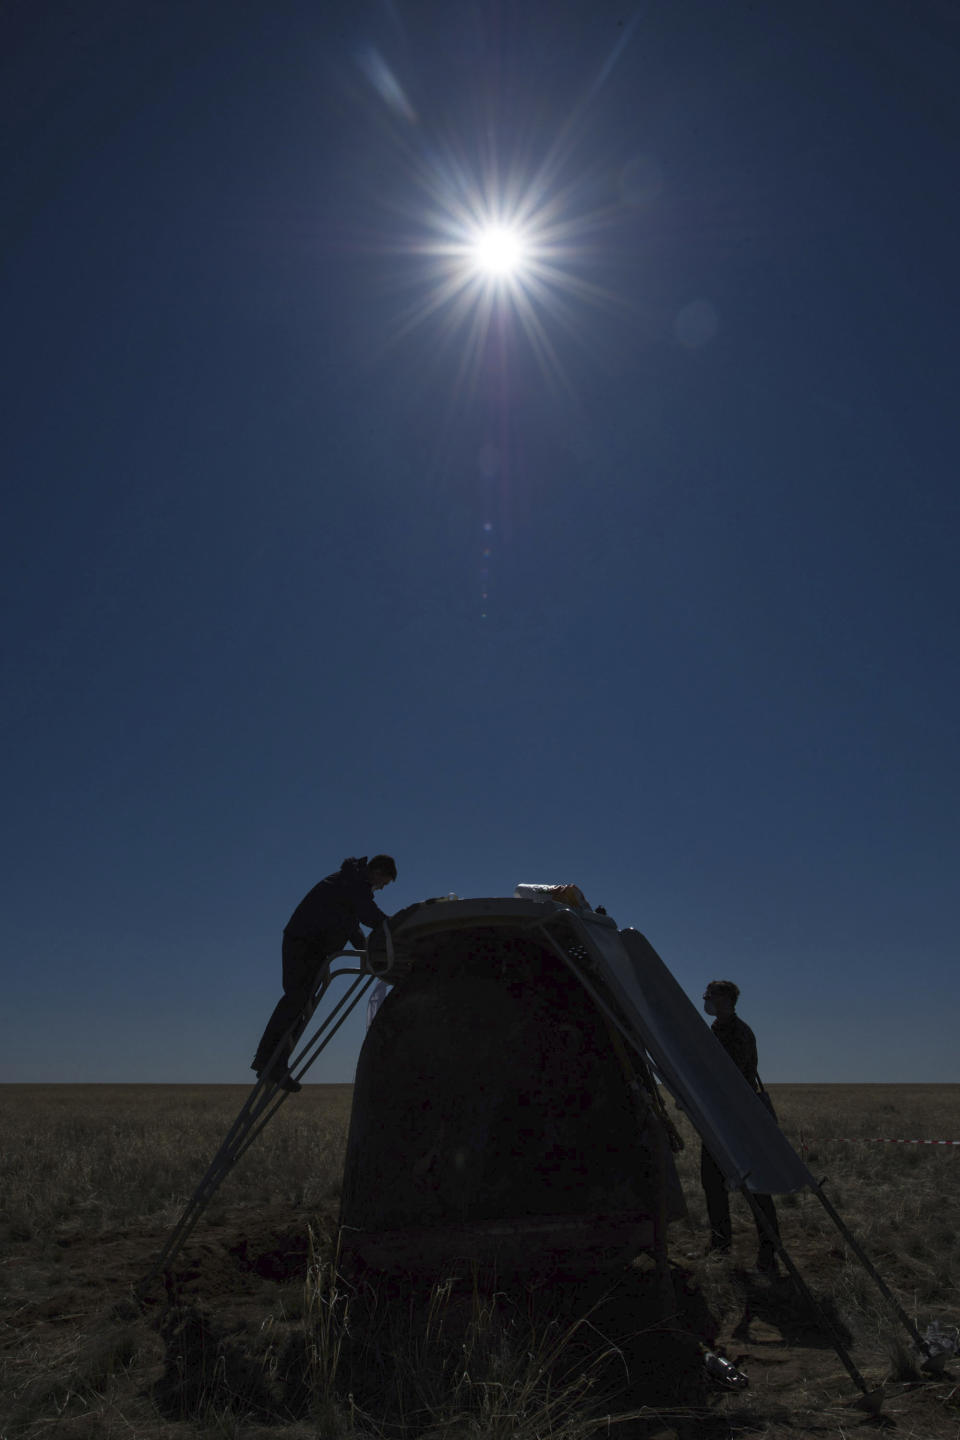 In this handout photo released by Gagarin Cosmonaut Training Centre (GCTC), Roscosmos space agency, specialists work after the landing of the Russian Soyuz MS-15 space capsule near Kazakh town of Dzhezkazgan, Kazakhstan, Friday, April 17, 2020. An International Space Station crew has landed safely after more than 200 days in space. The Soyuz capsule carrying NASA astronauts Andrew Morgan, Jessica Meir and Russian space agency Roscosmos' Oleg Skripochka touched down on Friday on the steppes of Kazakhstan. (Andrey Shelepin, Gagarin Cosmonaut Training Centre (GCTC), Roscosmos space agency, via AP)